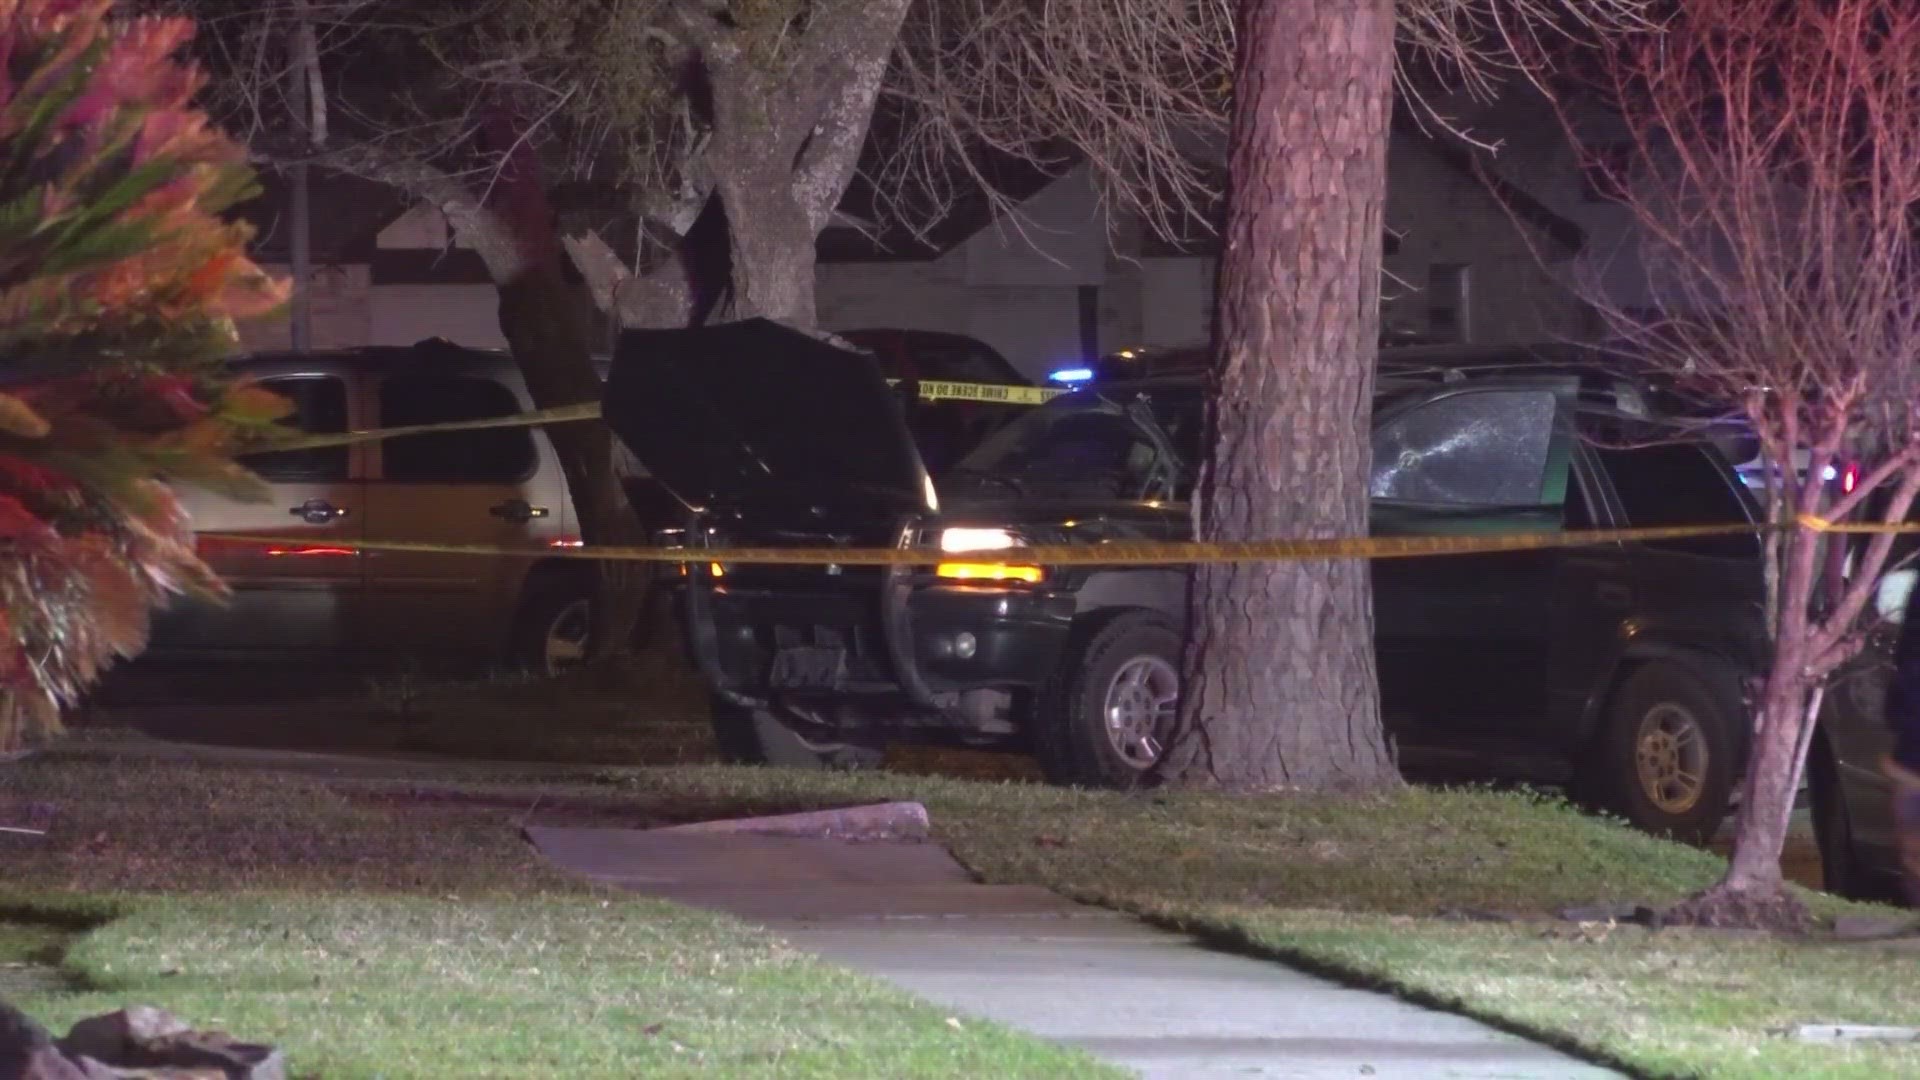 Sheriff Ed Gonzalez said the homeowner thought he saw the driver of the suspect vehicle pull a gun, and "fearing for his safety," began to shoot the suspect.